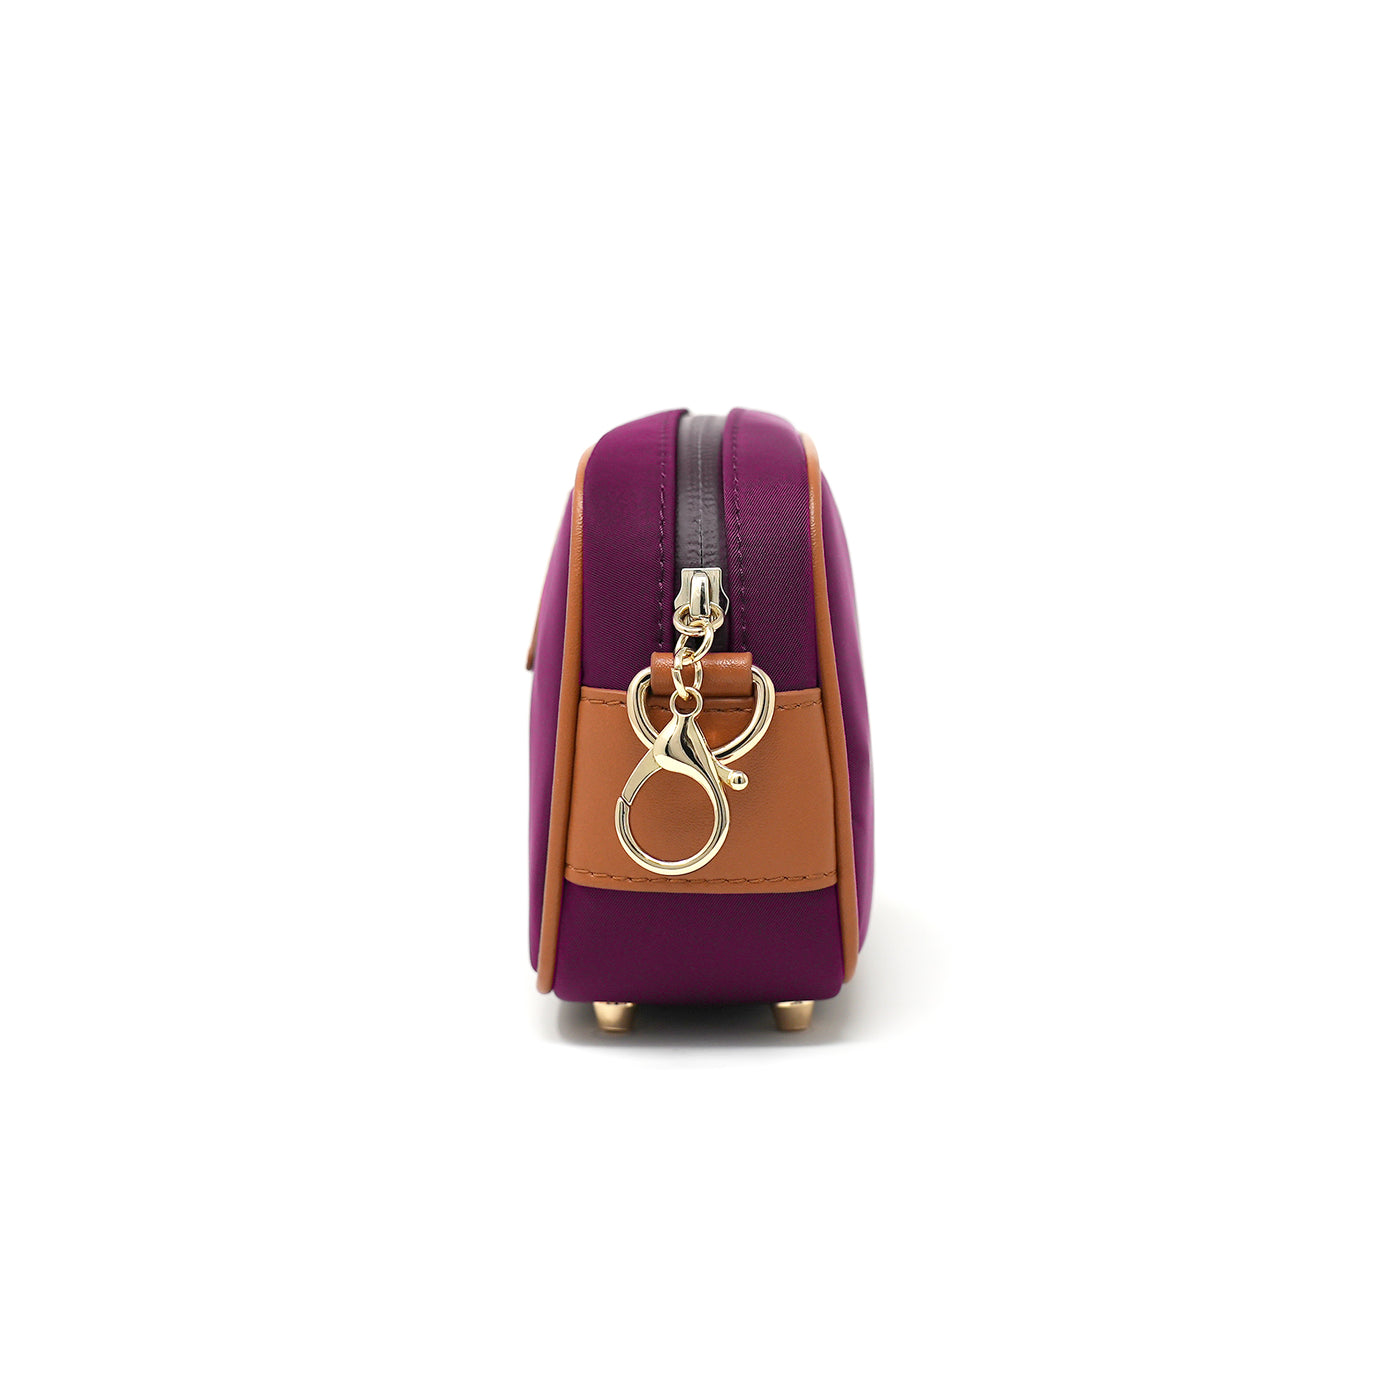 Anti-theft Water-resistant Travel Crossbody - Crissy Mini Crossbody in Maroon Gold - side view - Arden Cove